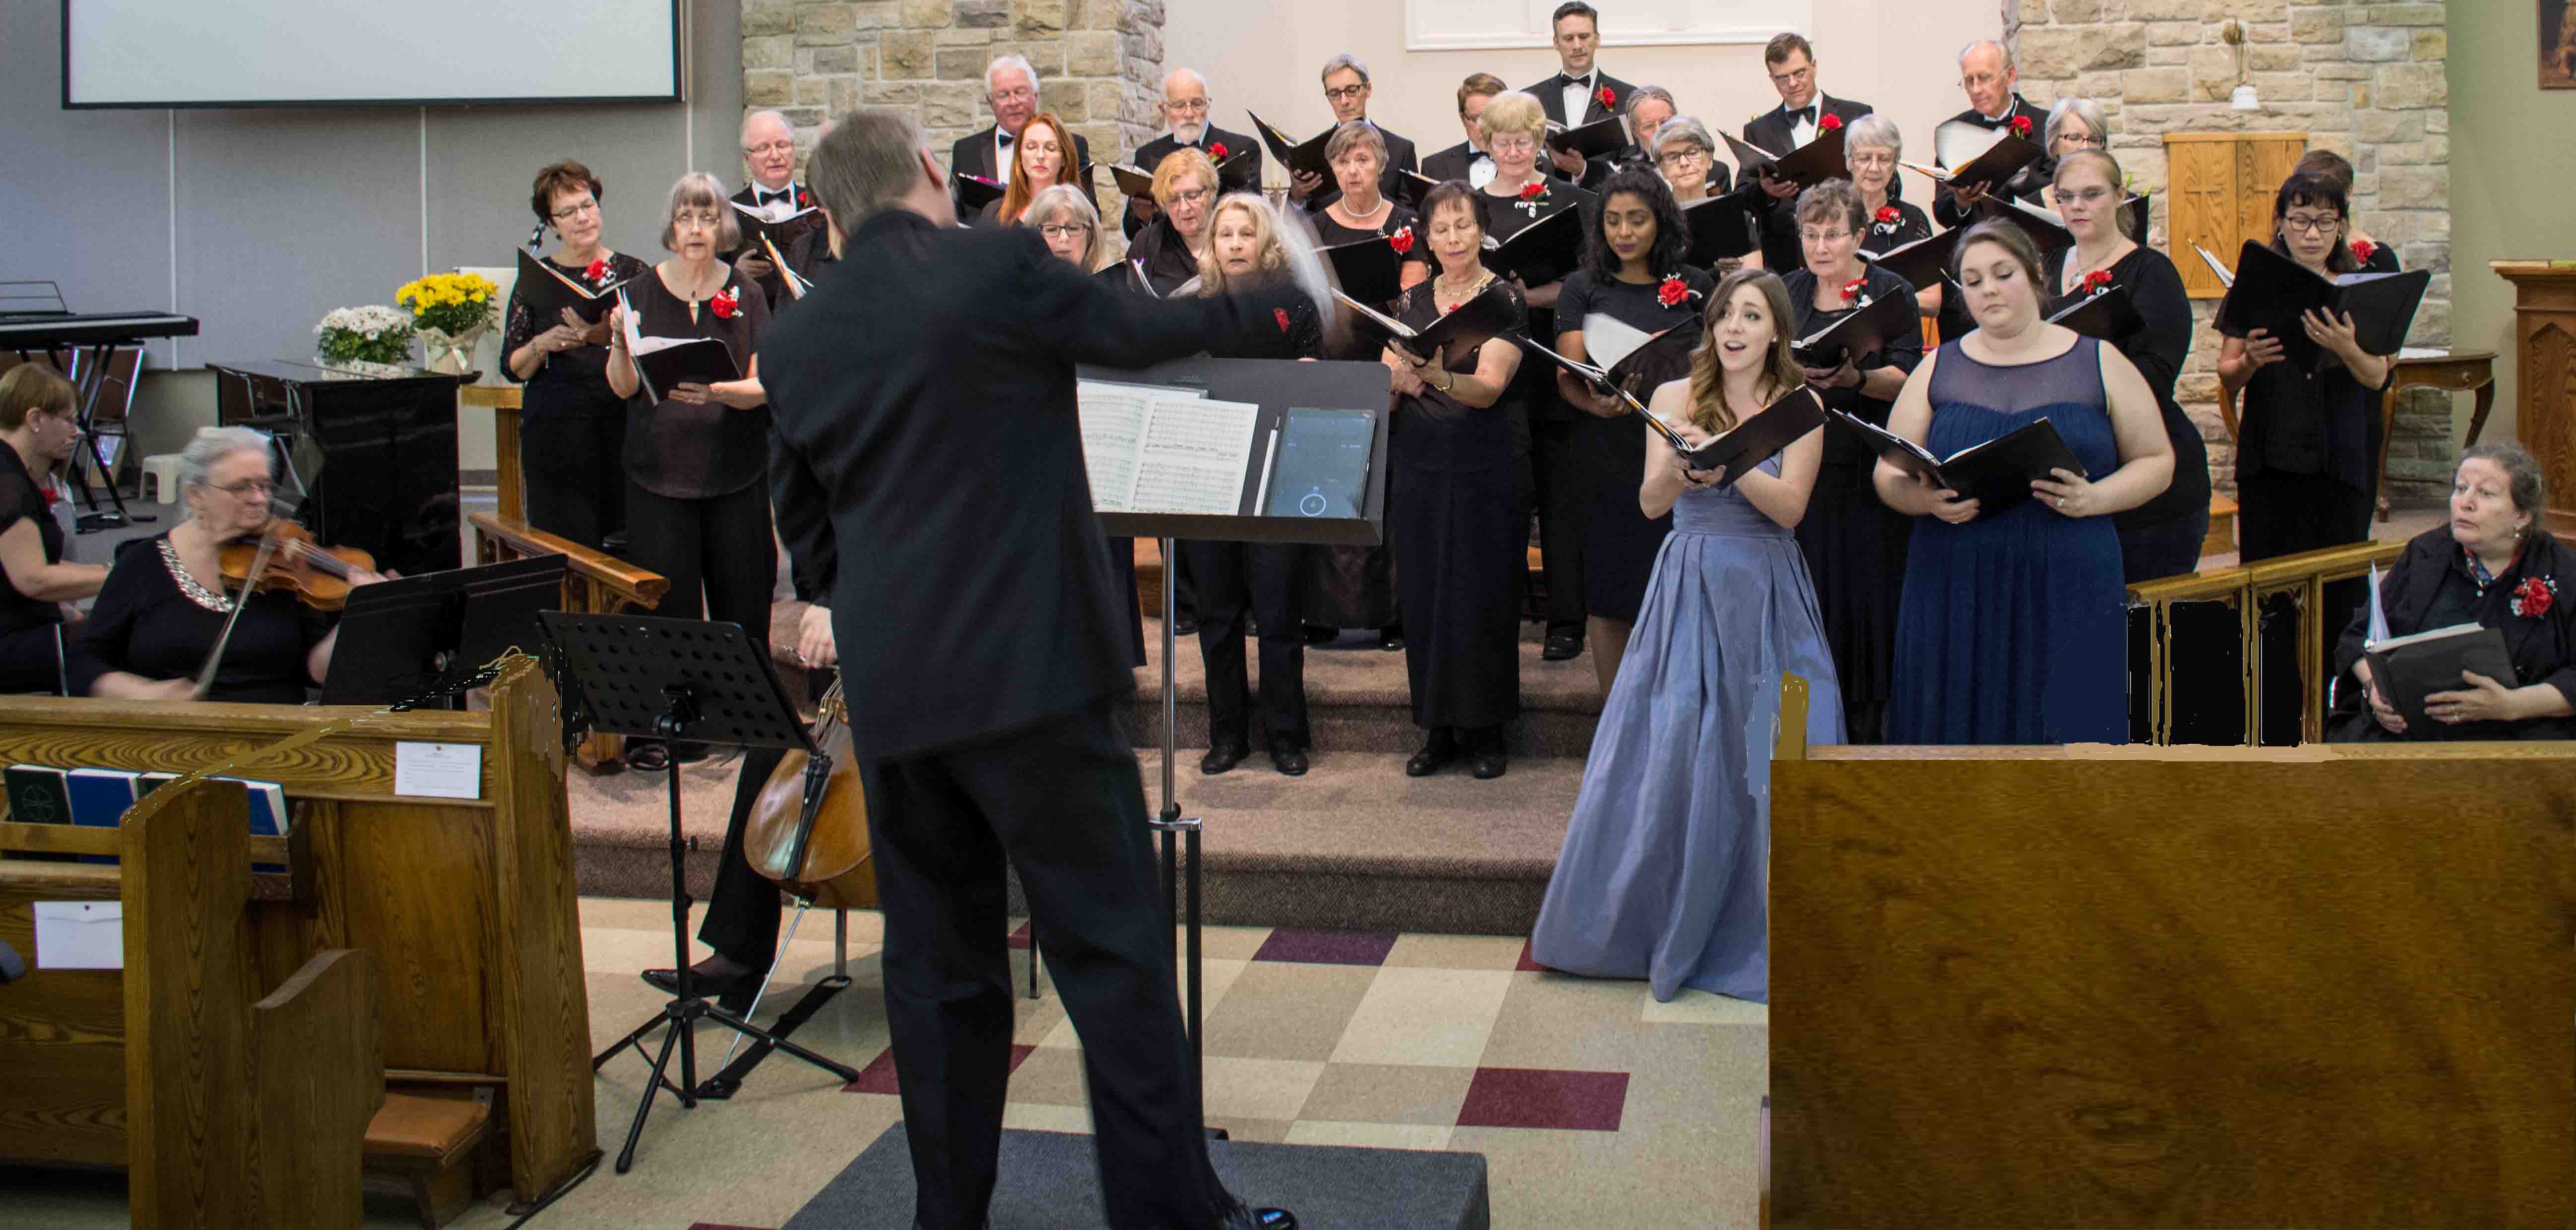 The choir in concert May 2017 photographed by Eric Castro